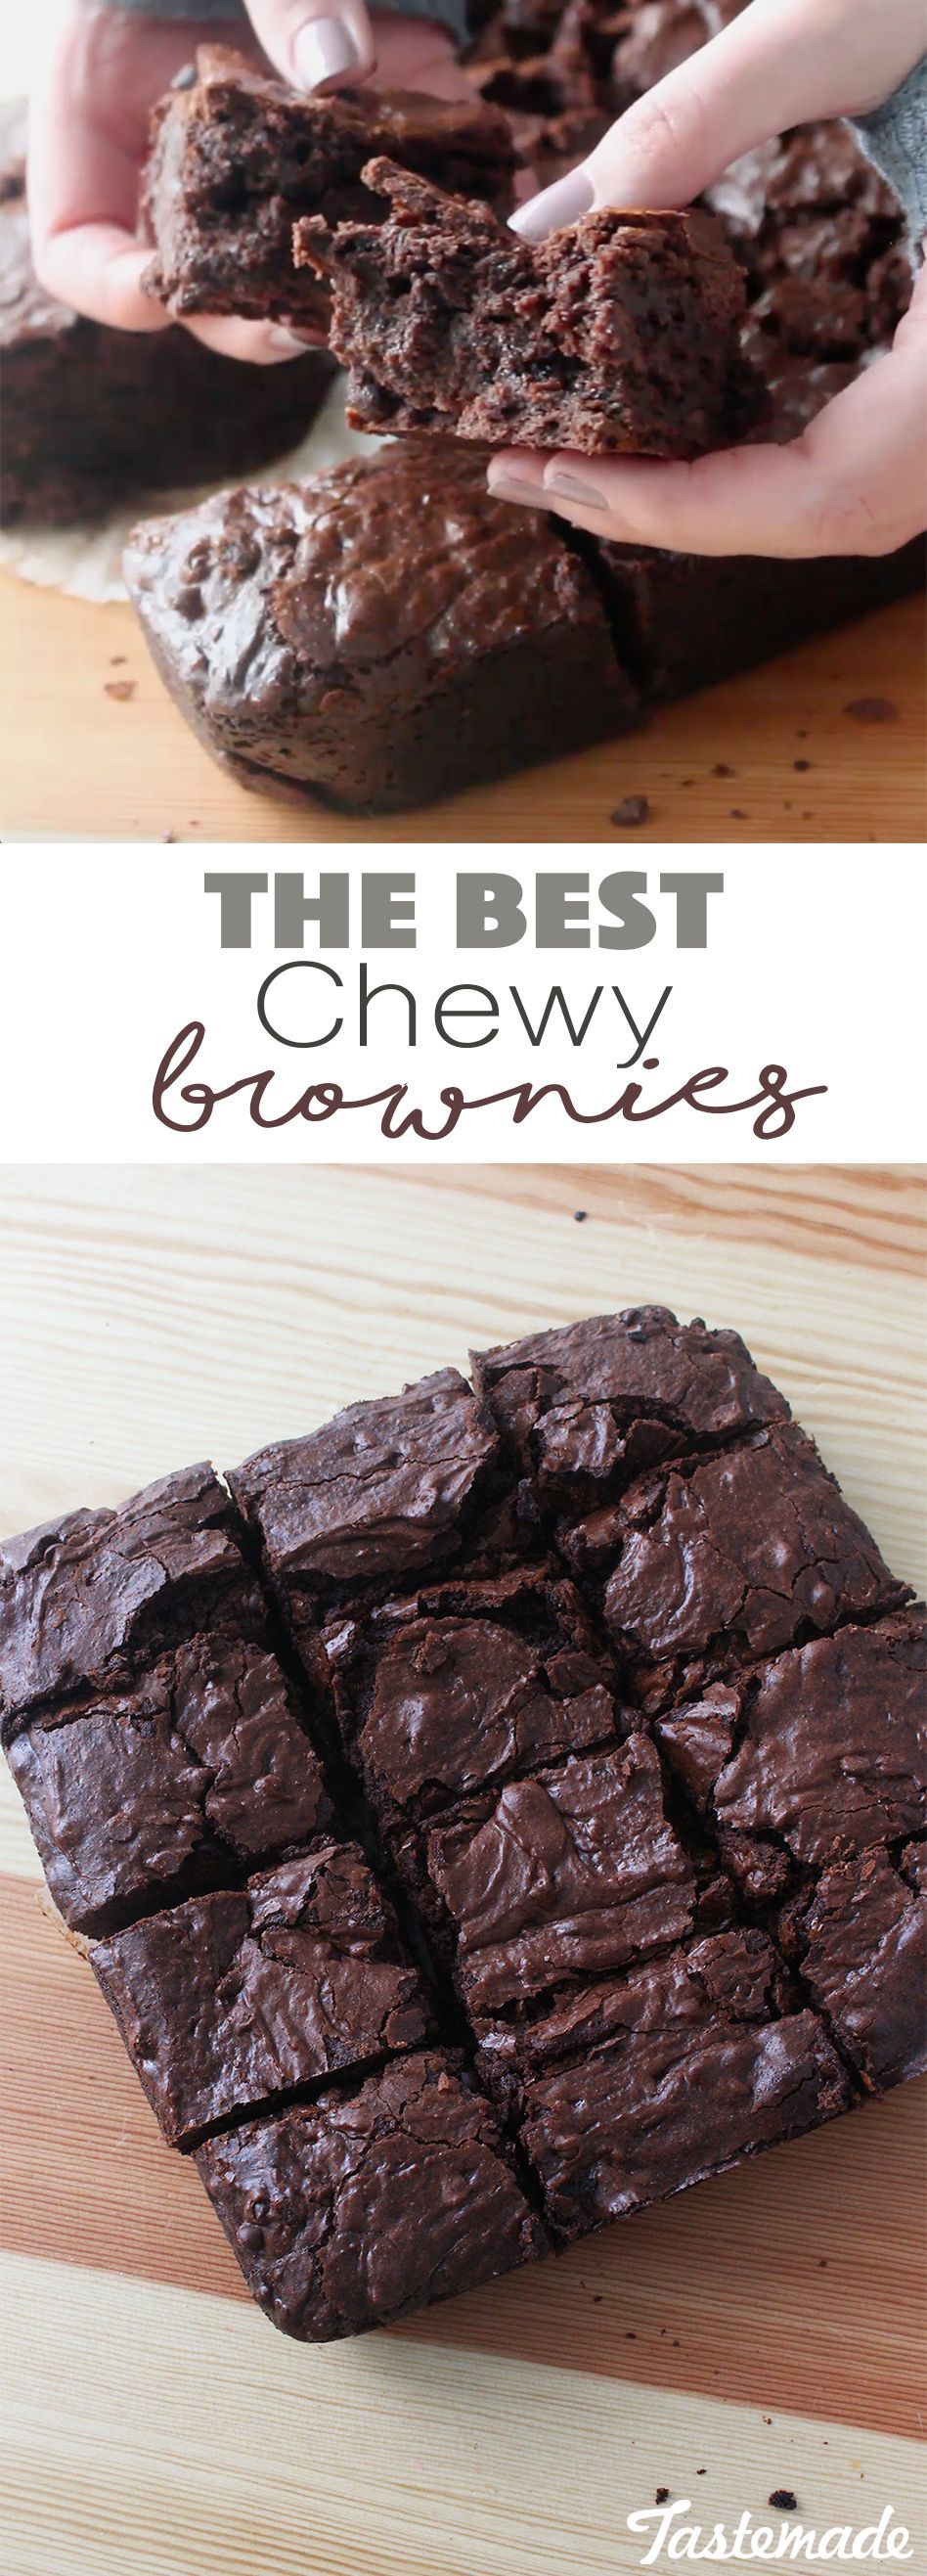 These brownies are so chewy, moist and perfect for any chocolate craving!